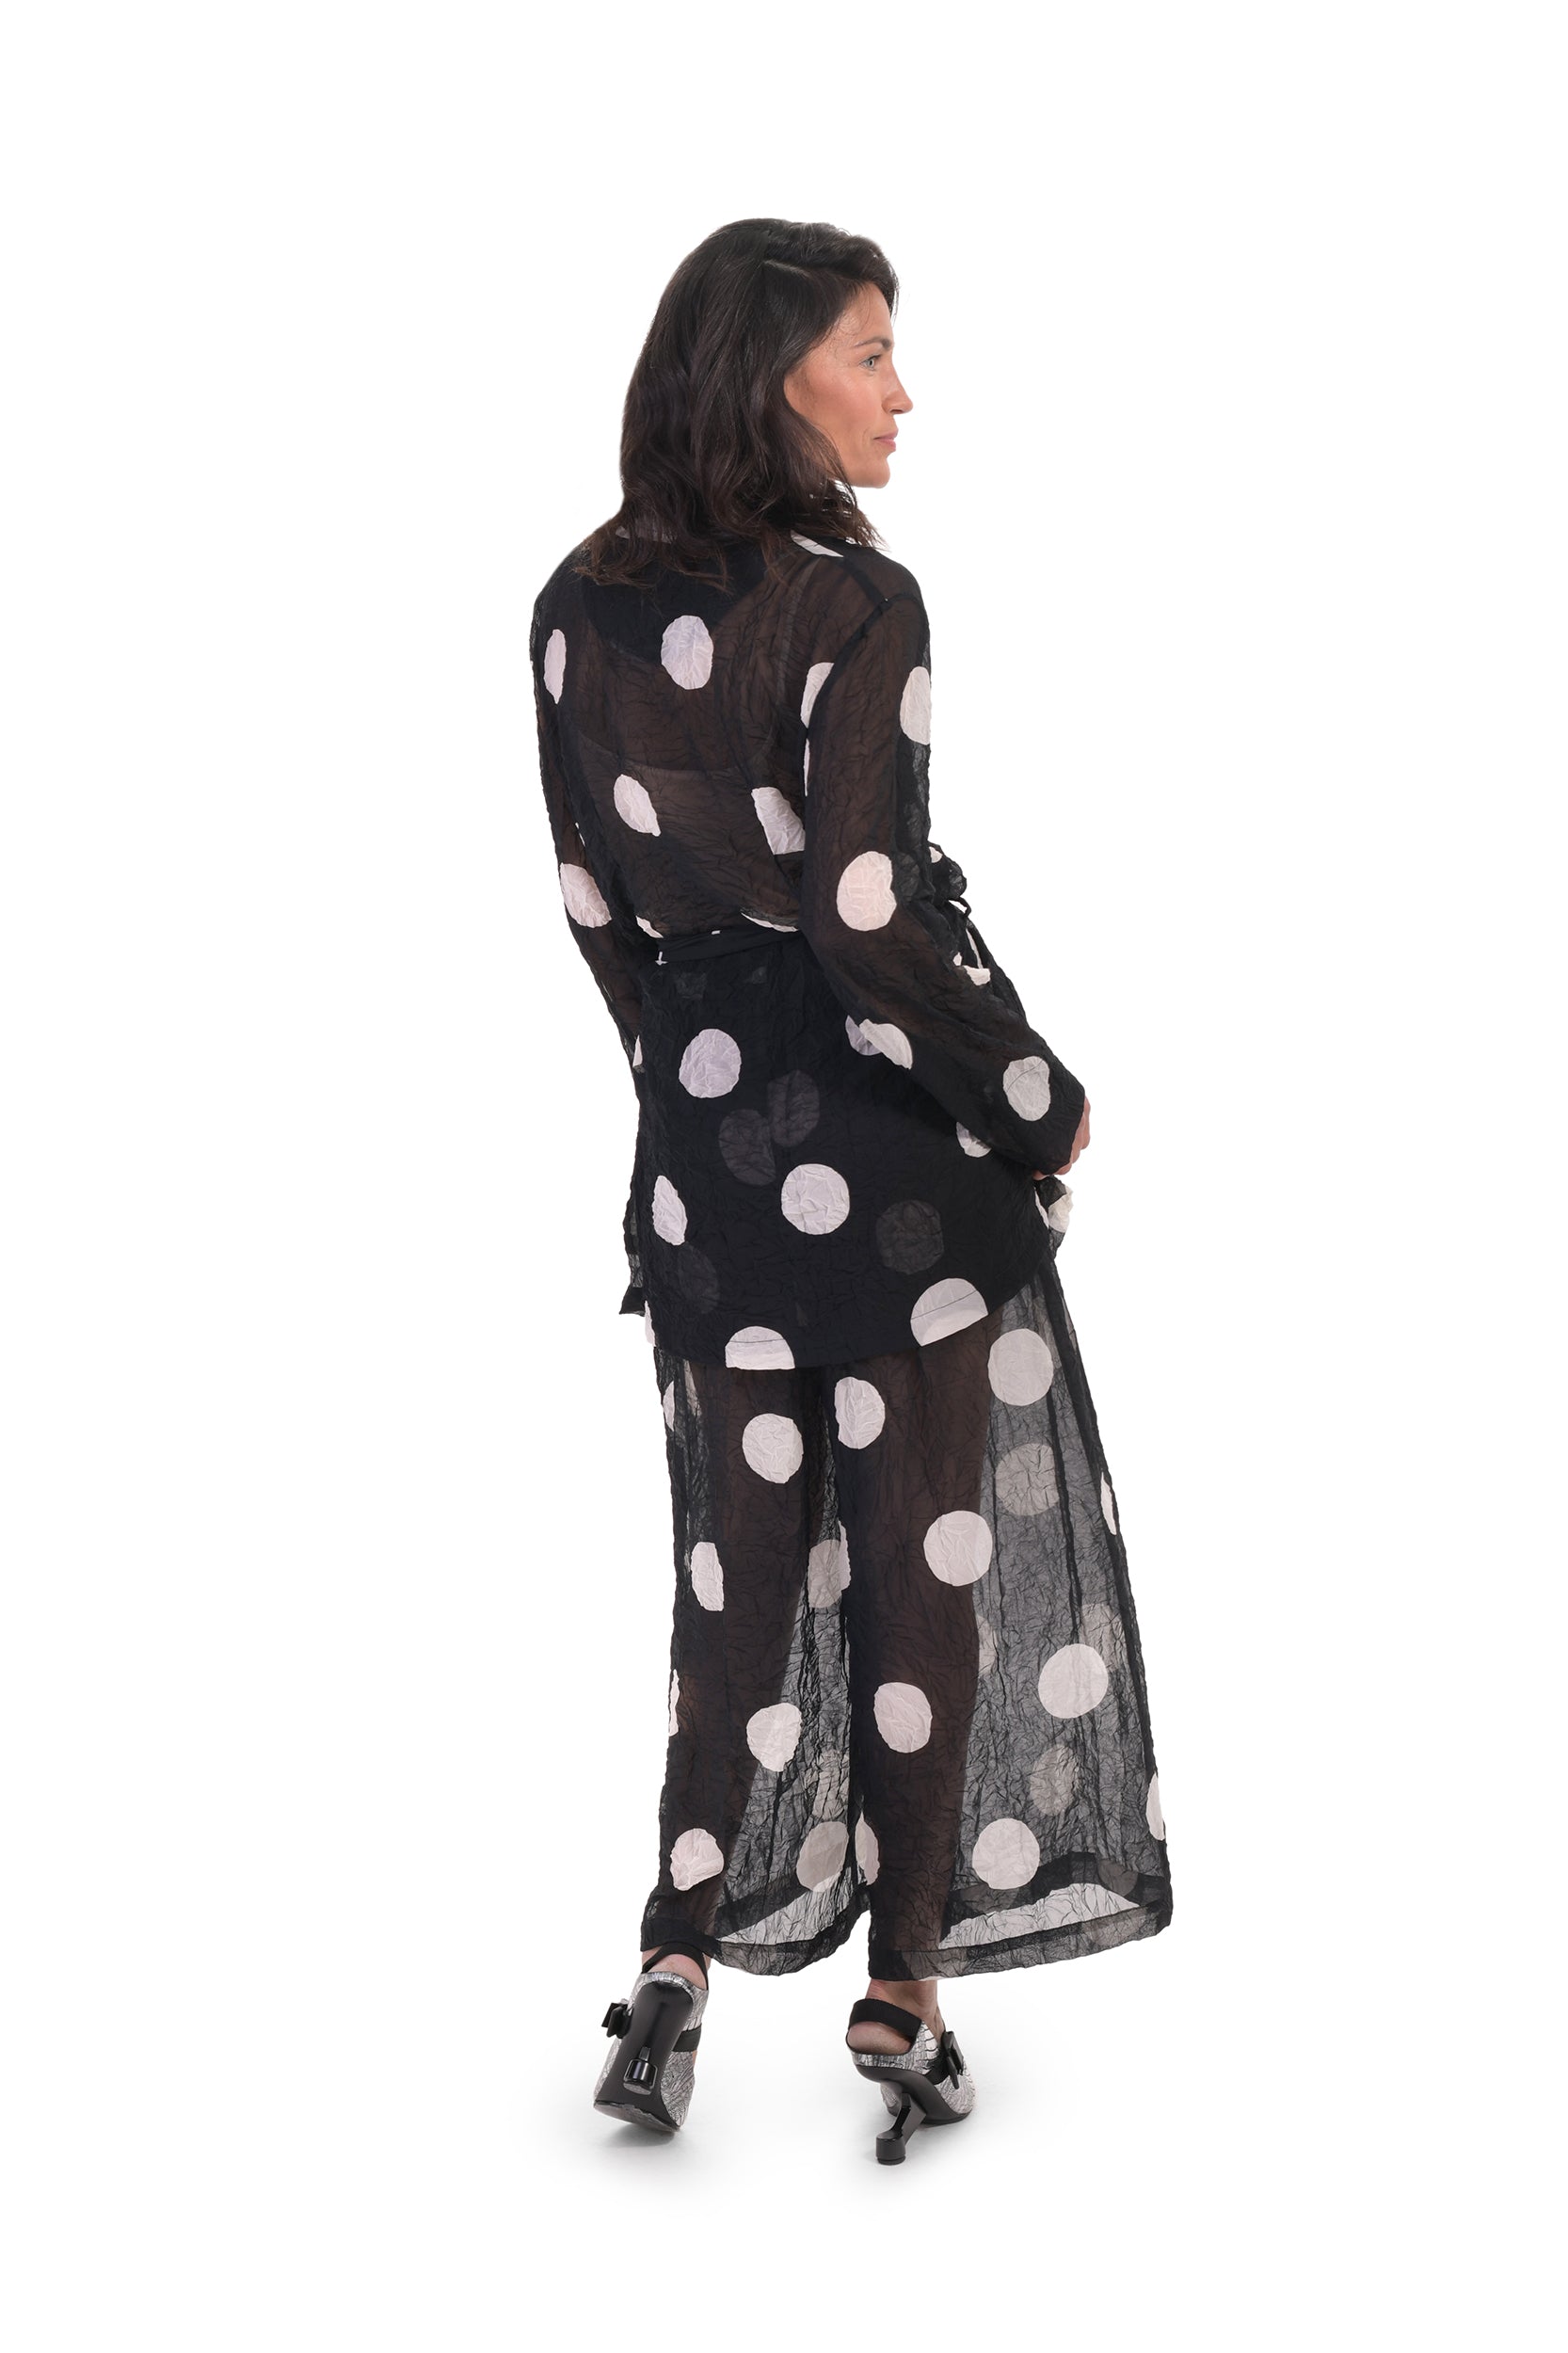 Back full body view of a woman wearing the alembika chiffon dot palazzo pant with a matching chiffon shirt. The pant and shirt is black with white dots. The fabric appears sheer. The pants are wide legged and end right above the ankles.